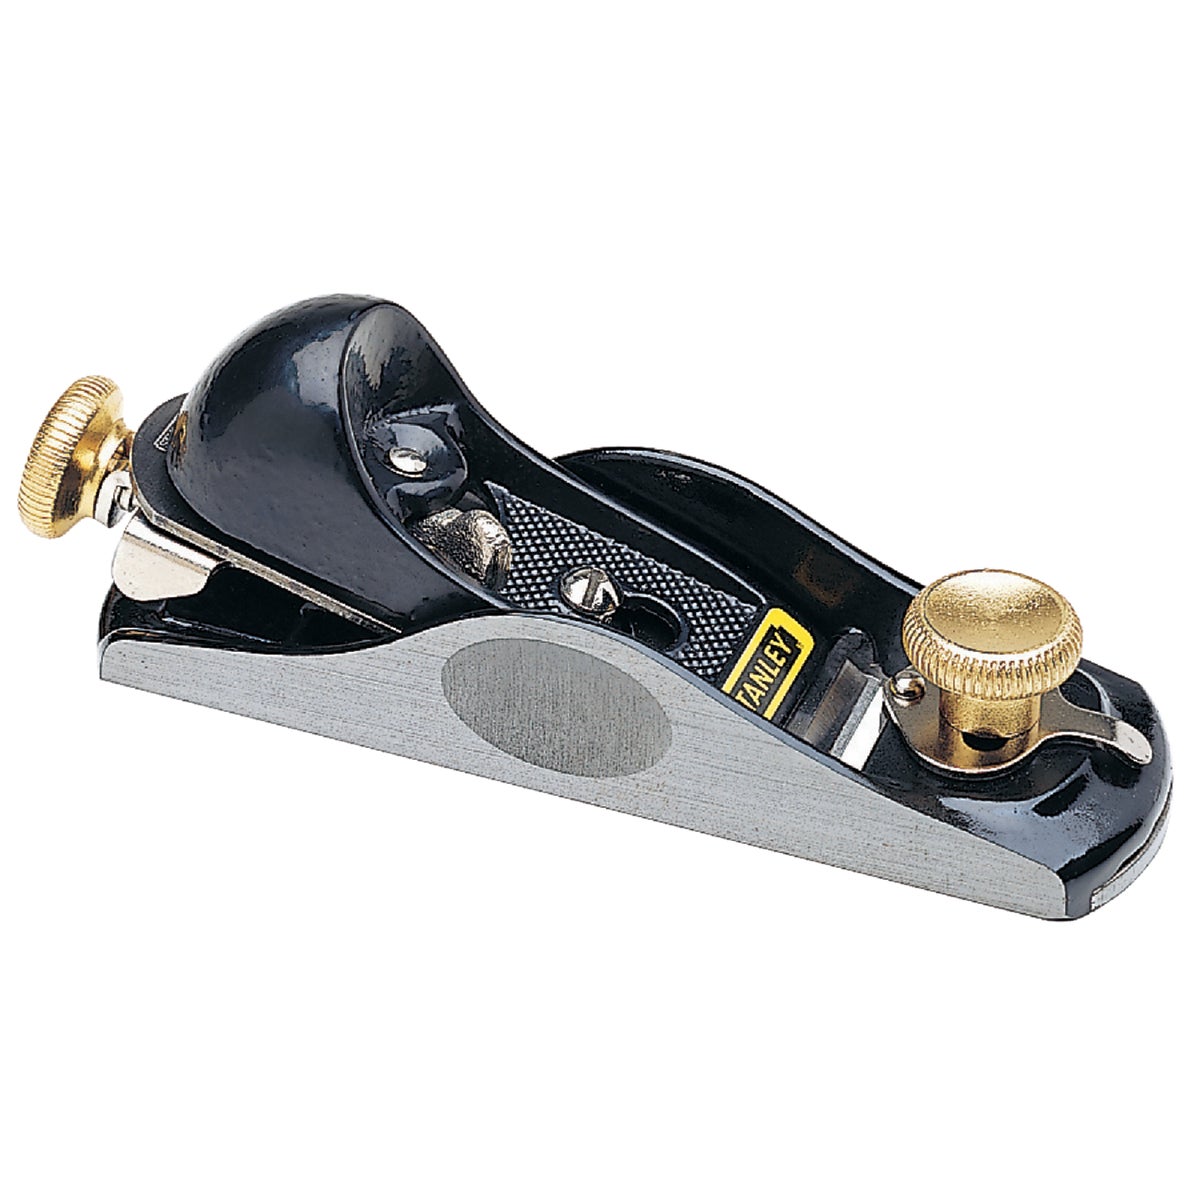 Stanley Bailey 6 In. Low Angle Block Plane with 1-3/8 In. Cutter